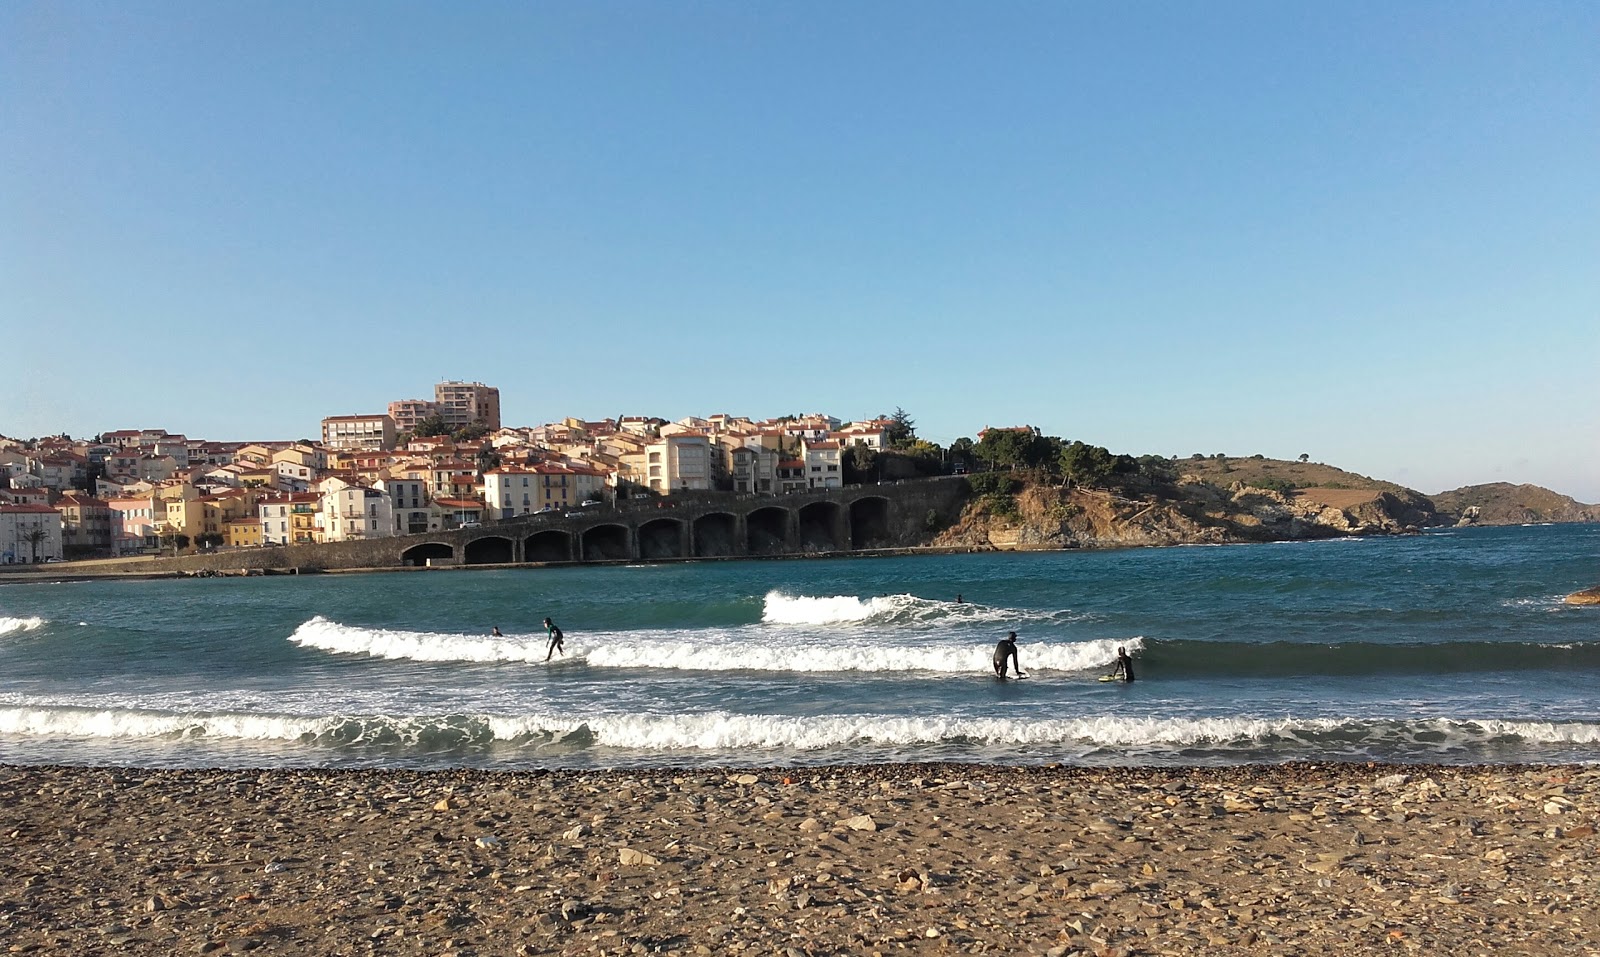 Photo of Banyuls sur Mer beach and the settlement